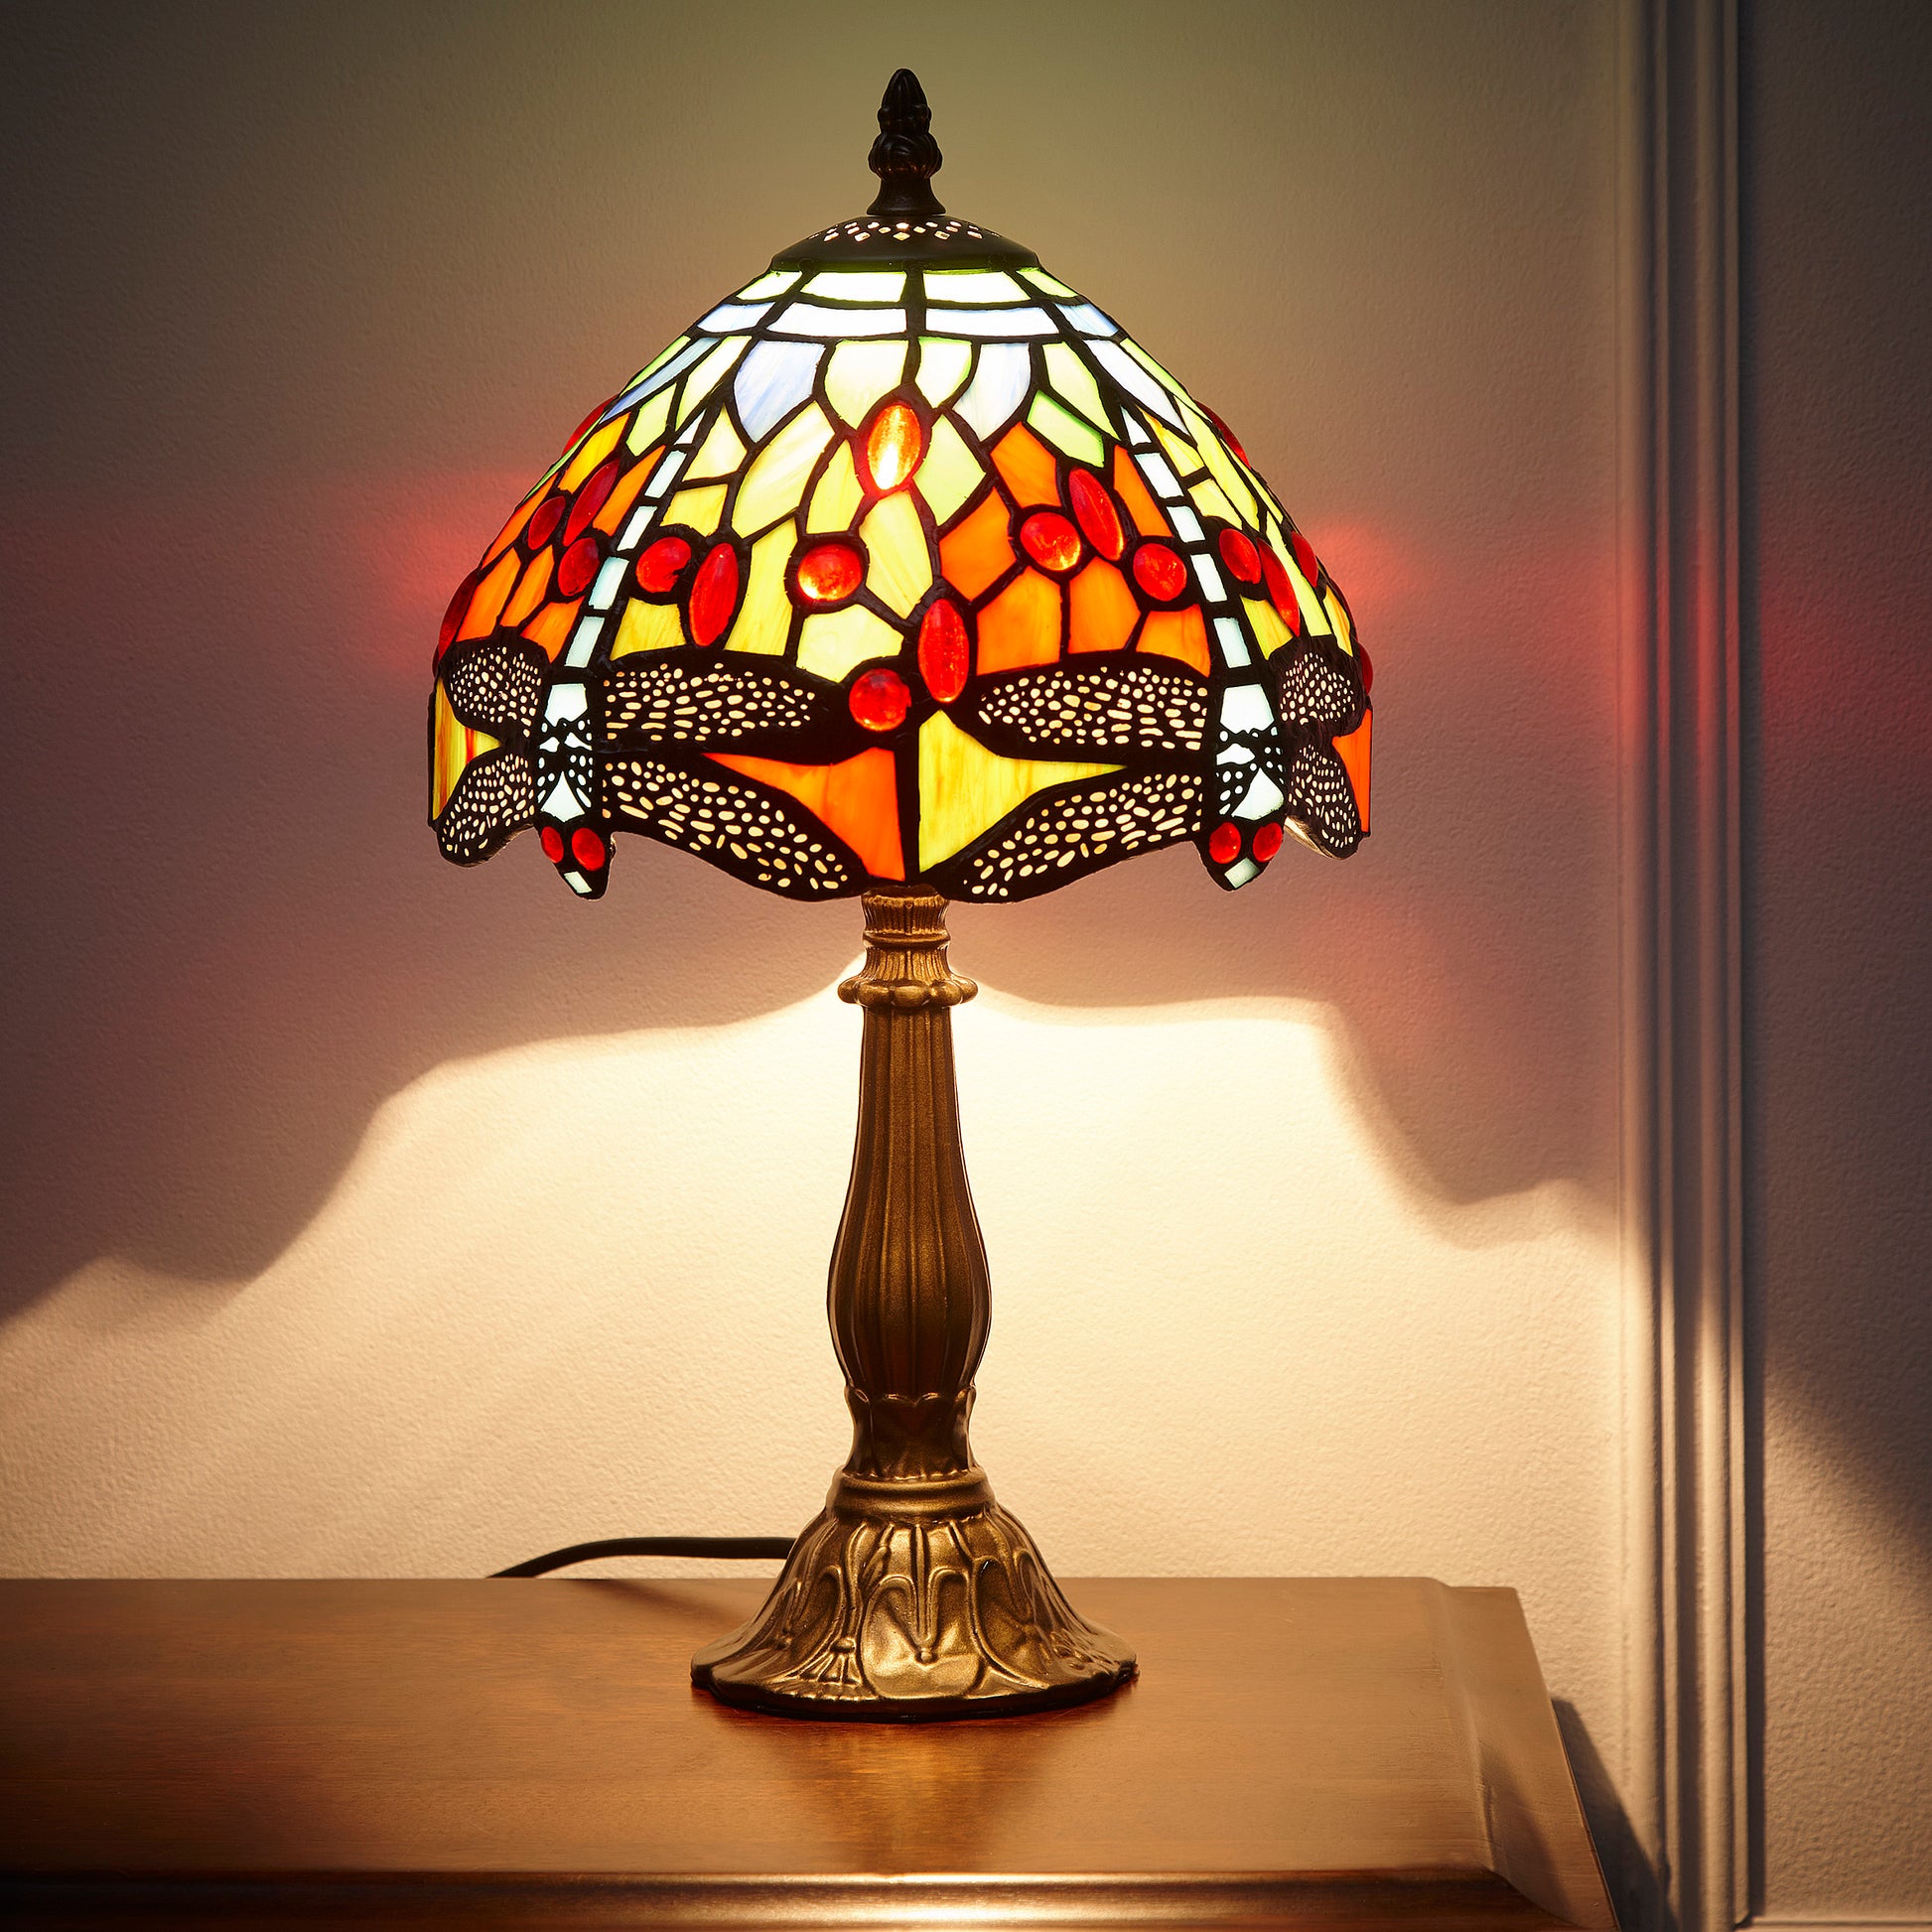 Mitcham Tiffany Style 8 inch Table Lamp with a Dragon Fly Pattern design